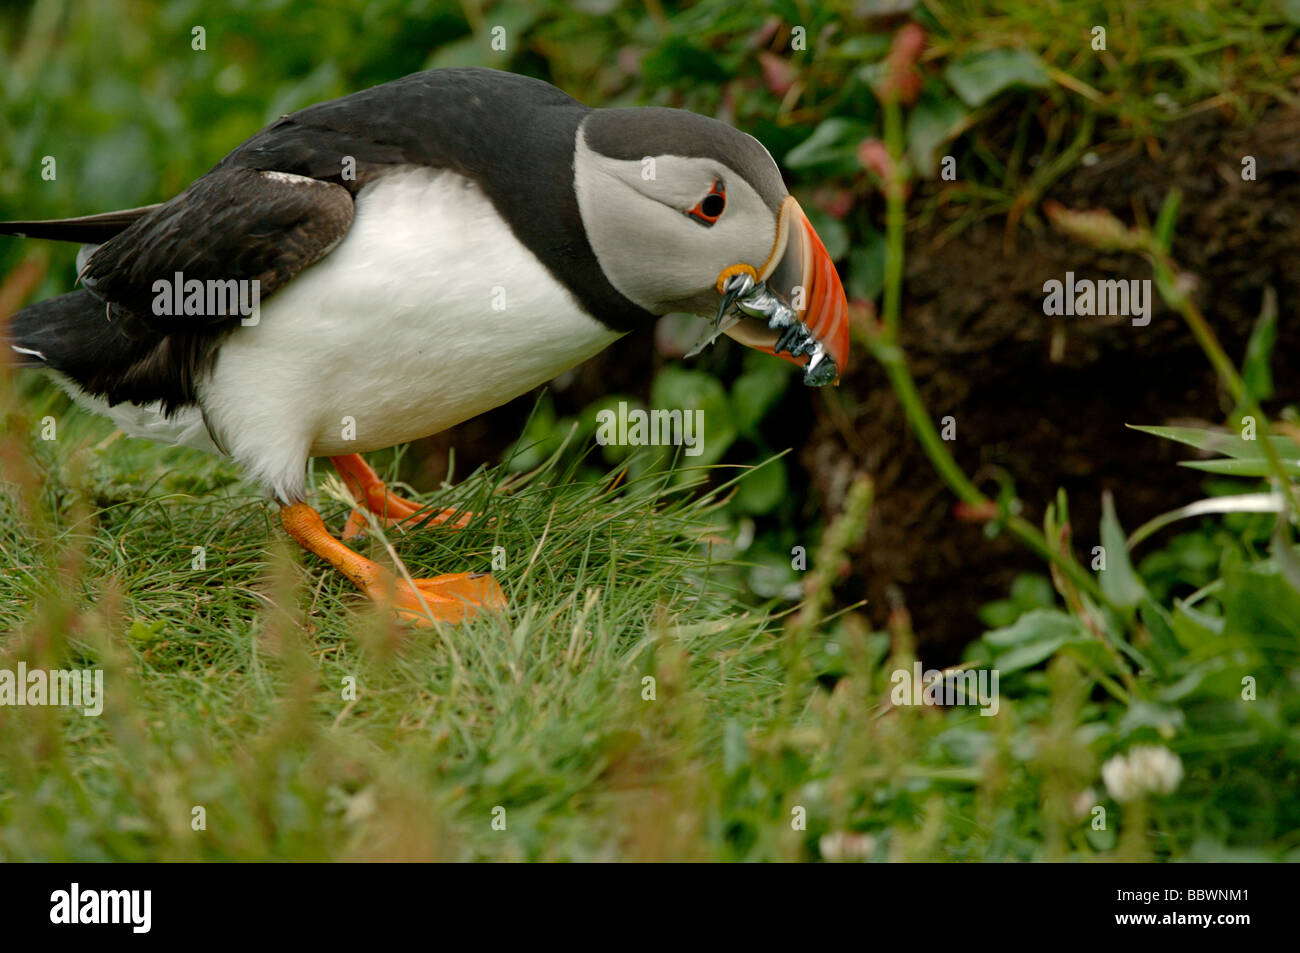 Ammodendron High Resolution Stock Photography and Images - Alamy